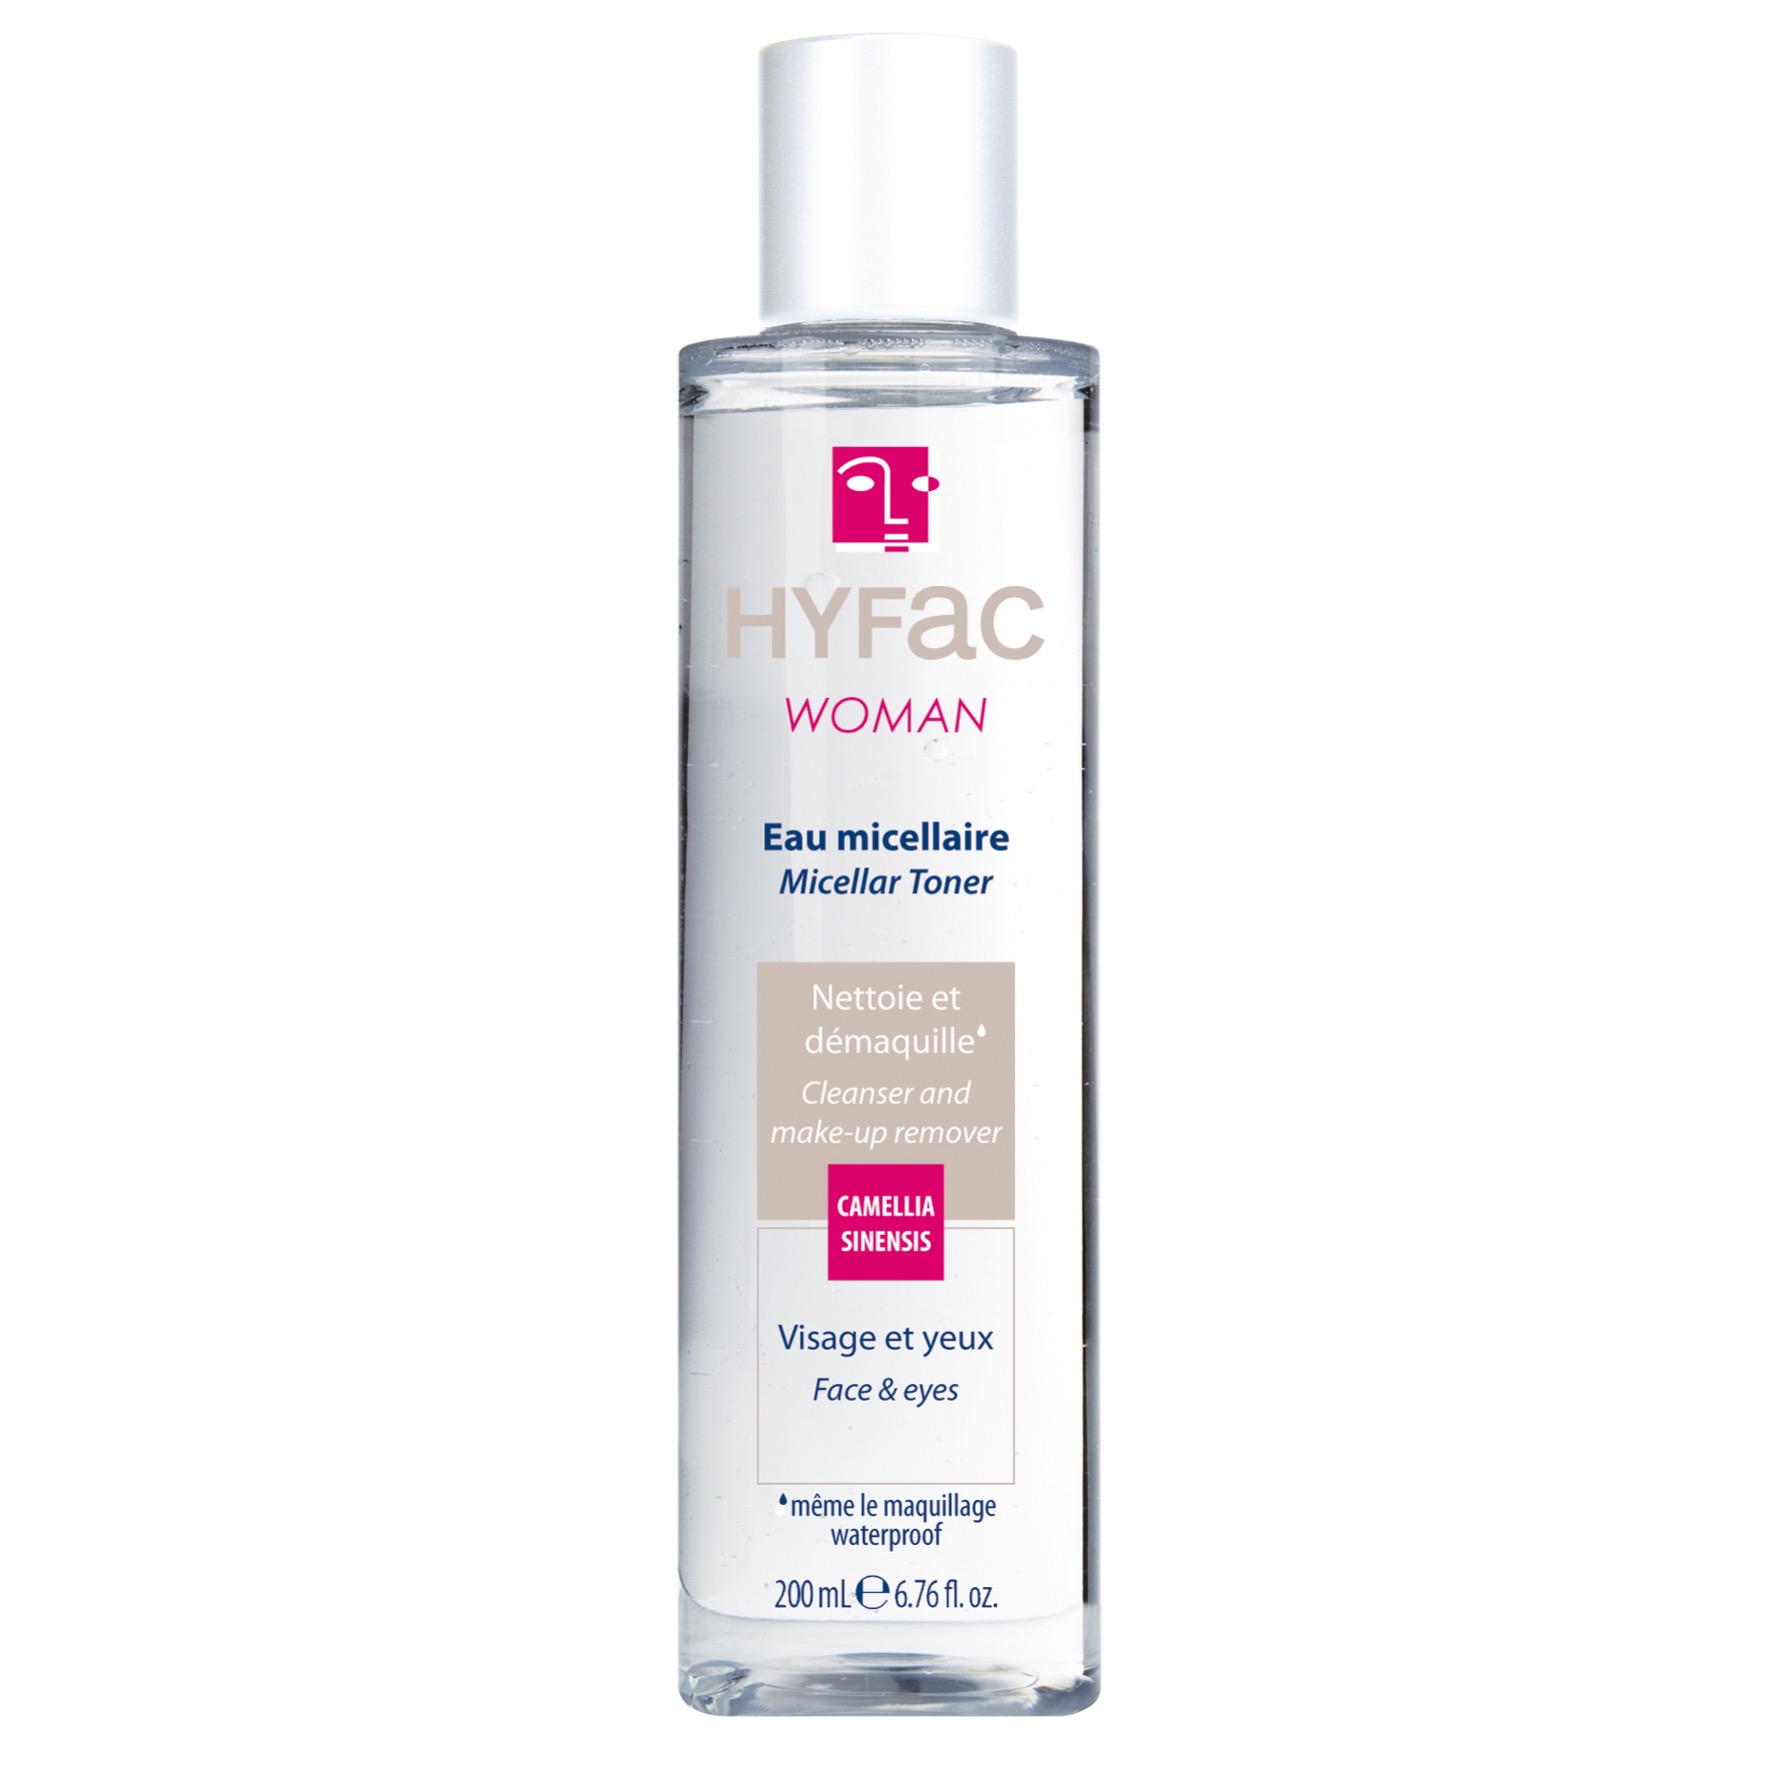 HYFAC WOMAN Micellar water cleanses and removes make-up